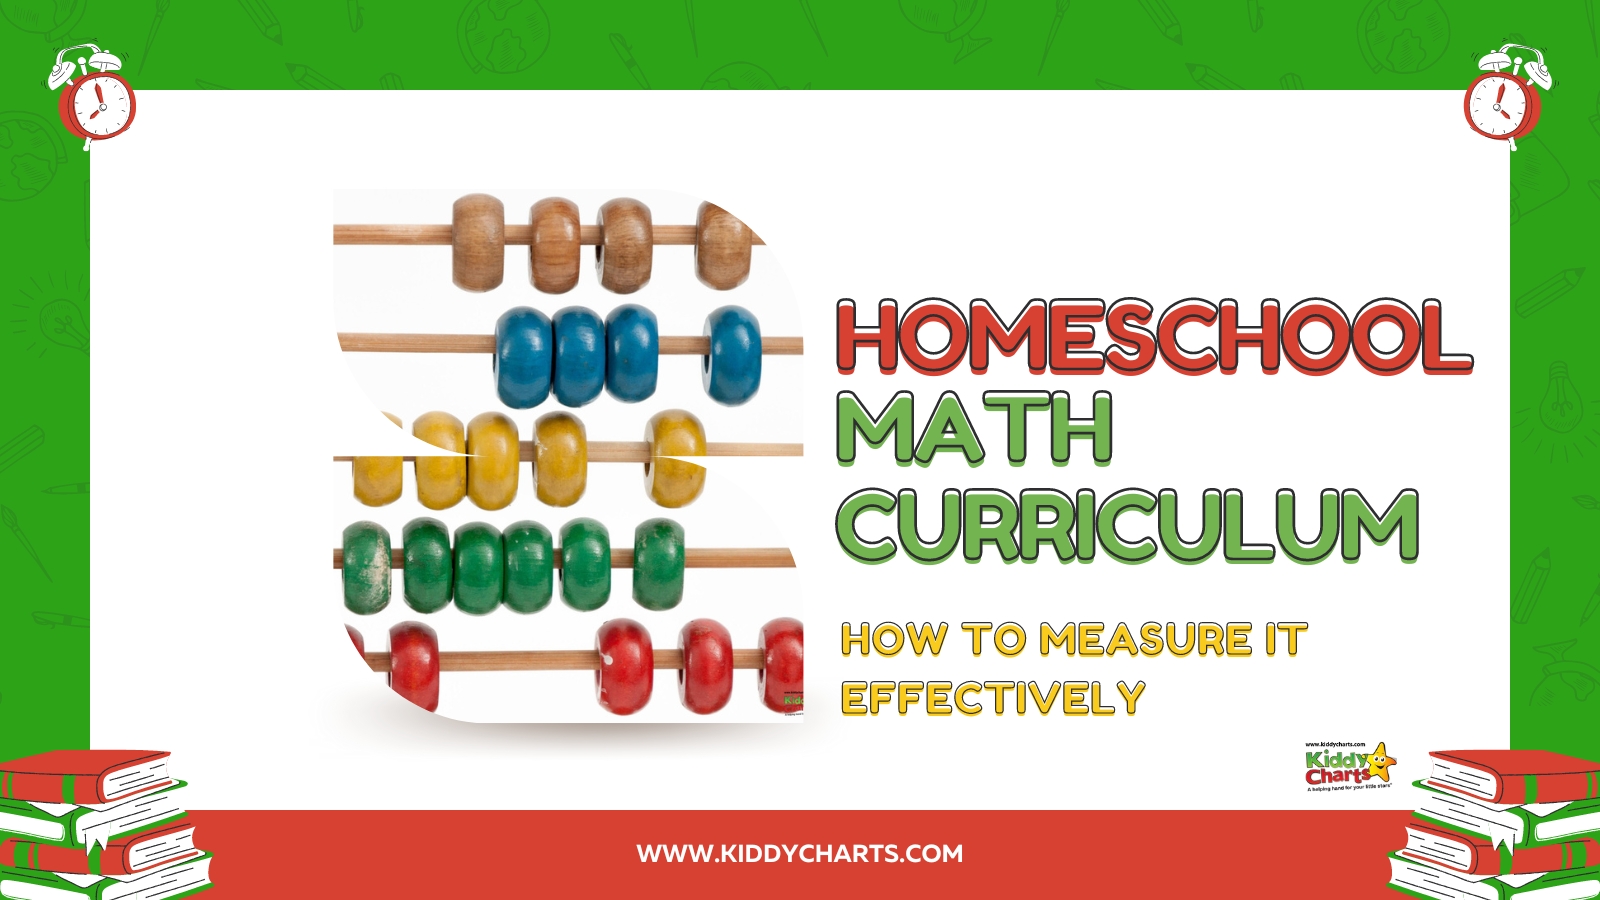 Measuring the success of your homeschool math curriculum so it rocks